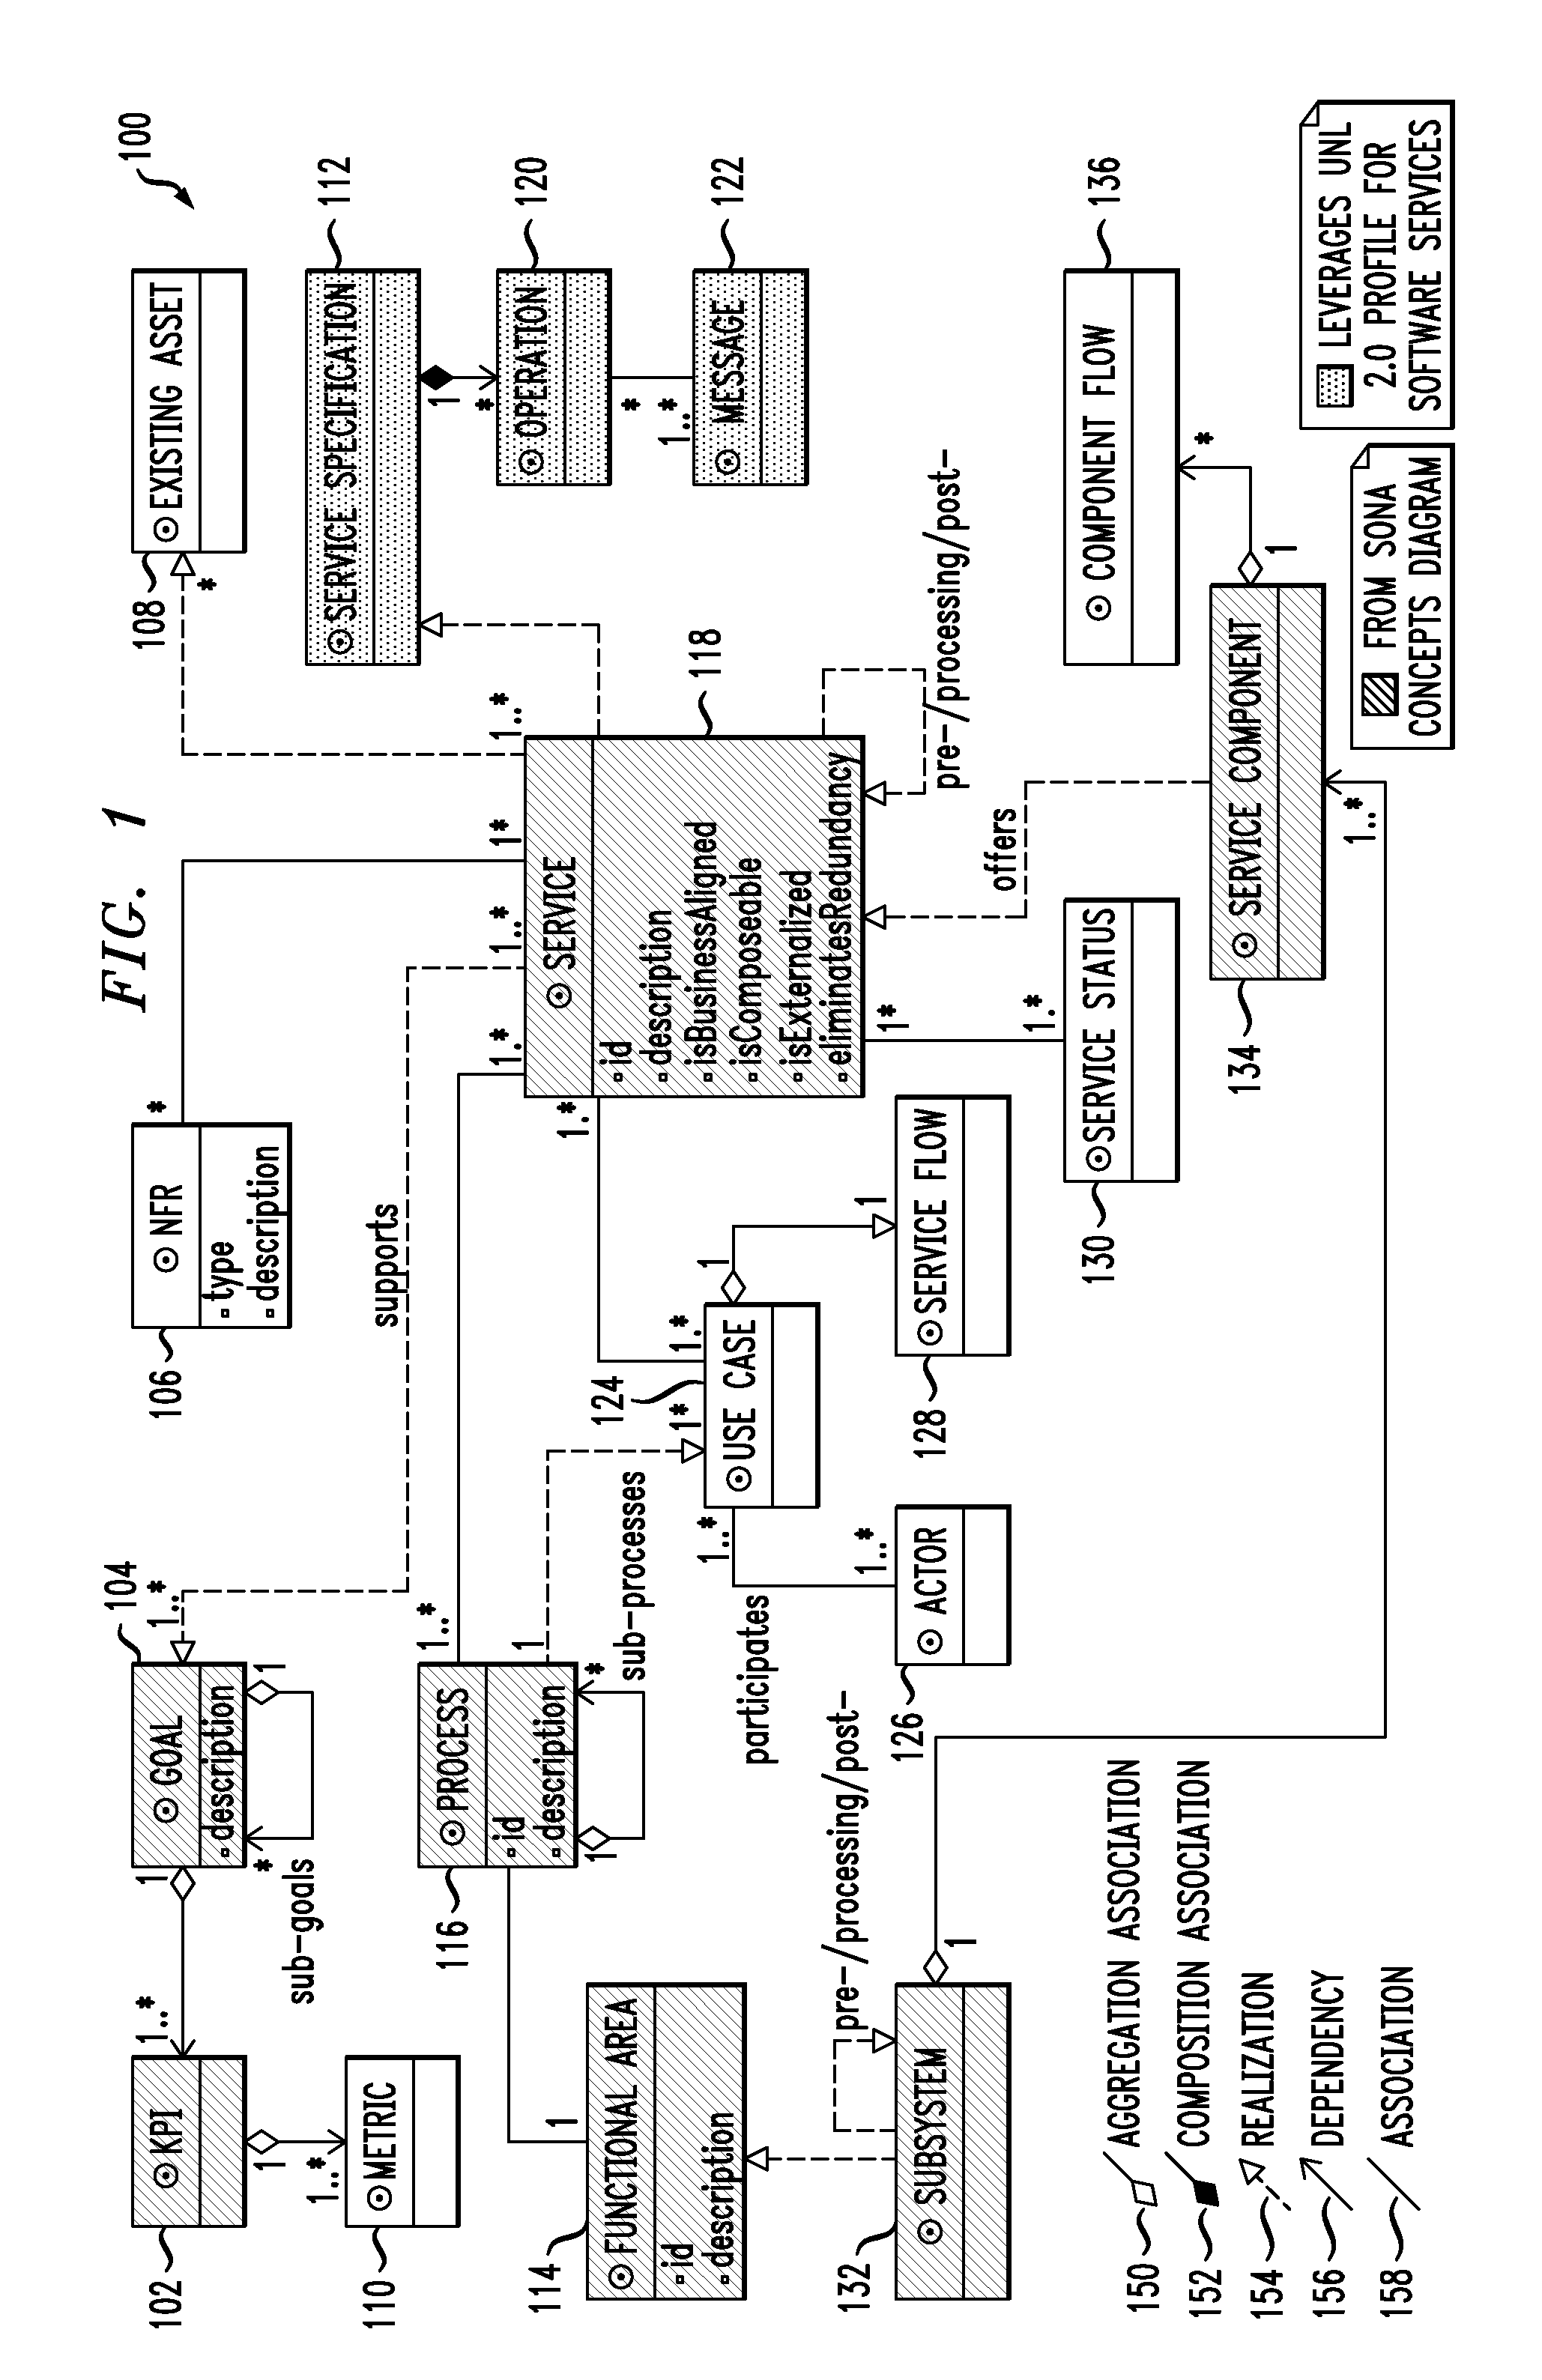 Method and Apparatus for Service-Oriented Architecture Process Decomposition And Service Modeling